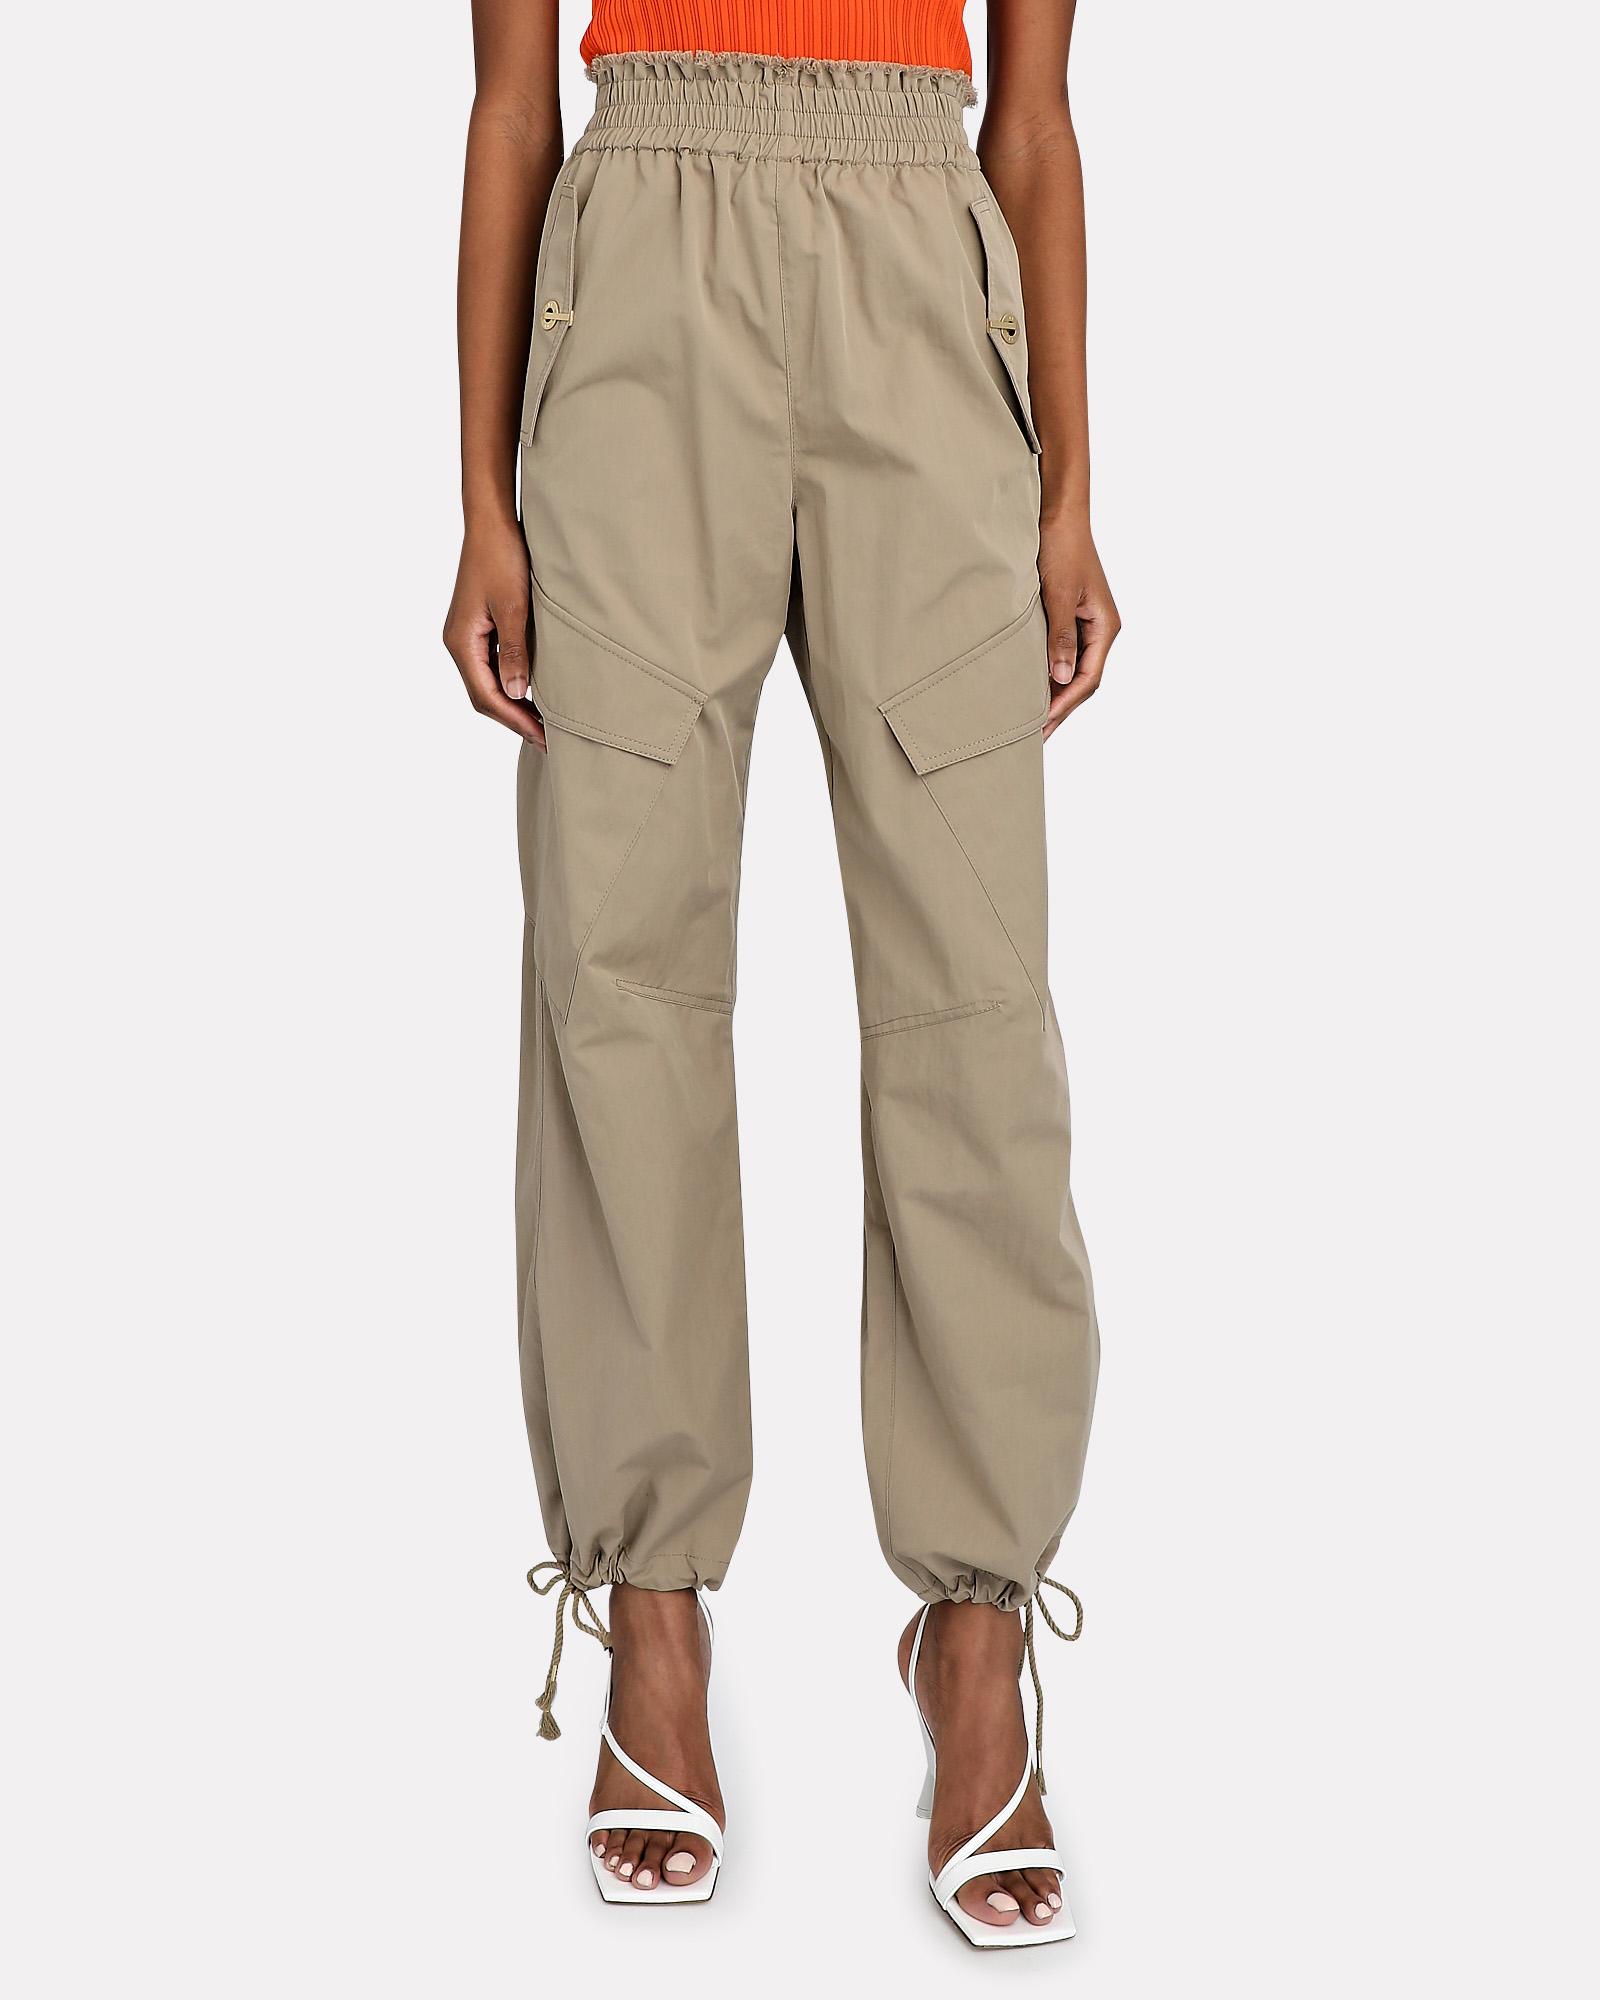 Dion Lee Frayed Rope Cotton Blend Cargo Pants in Natural | Lyst